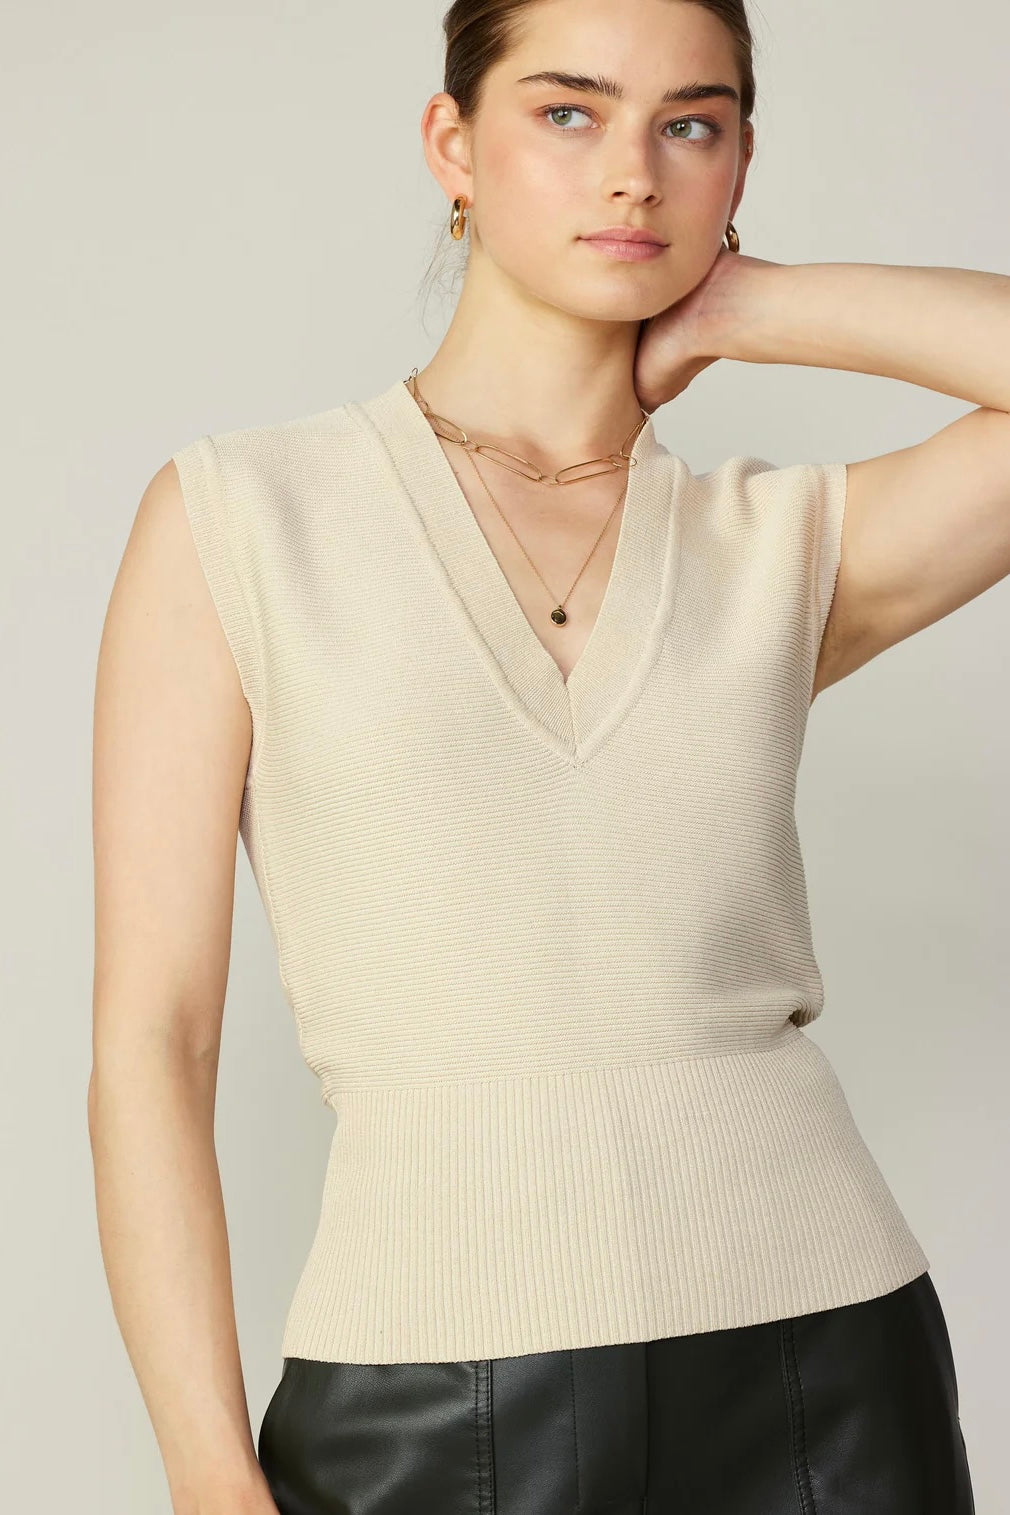 Current Air Ribbed Collar Sweater Vest